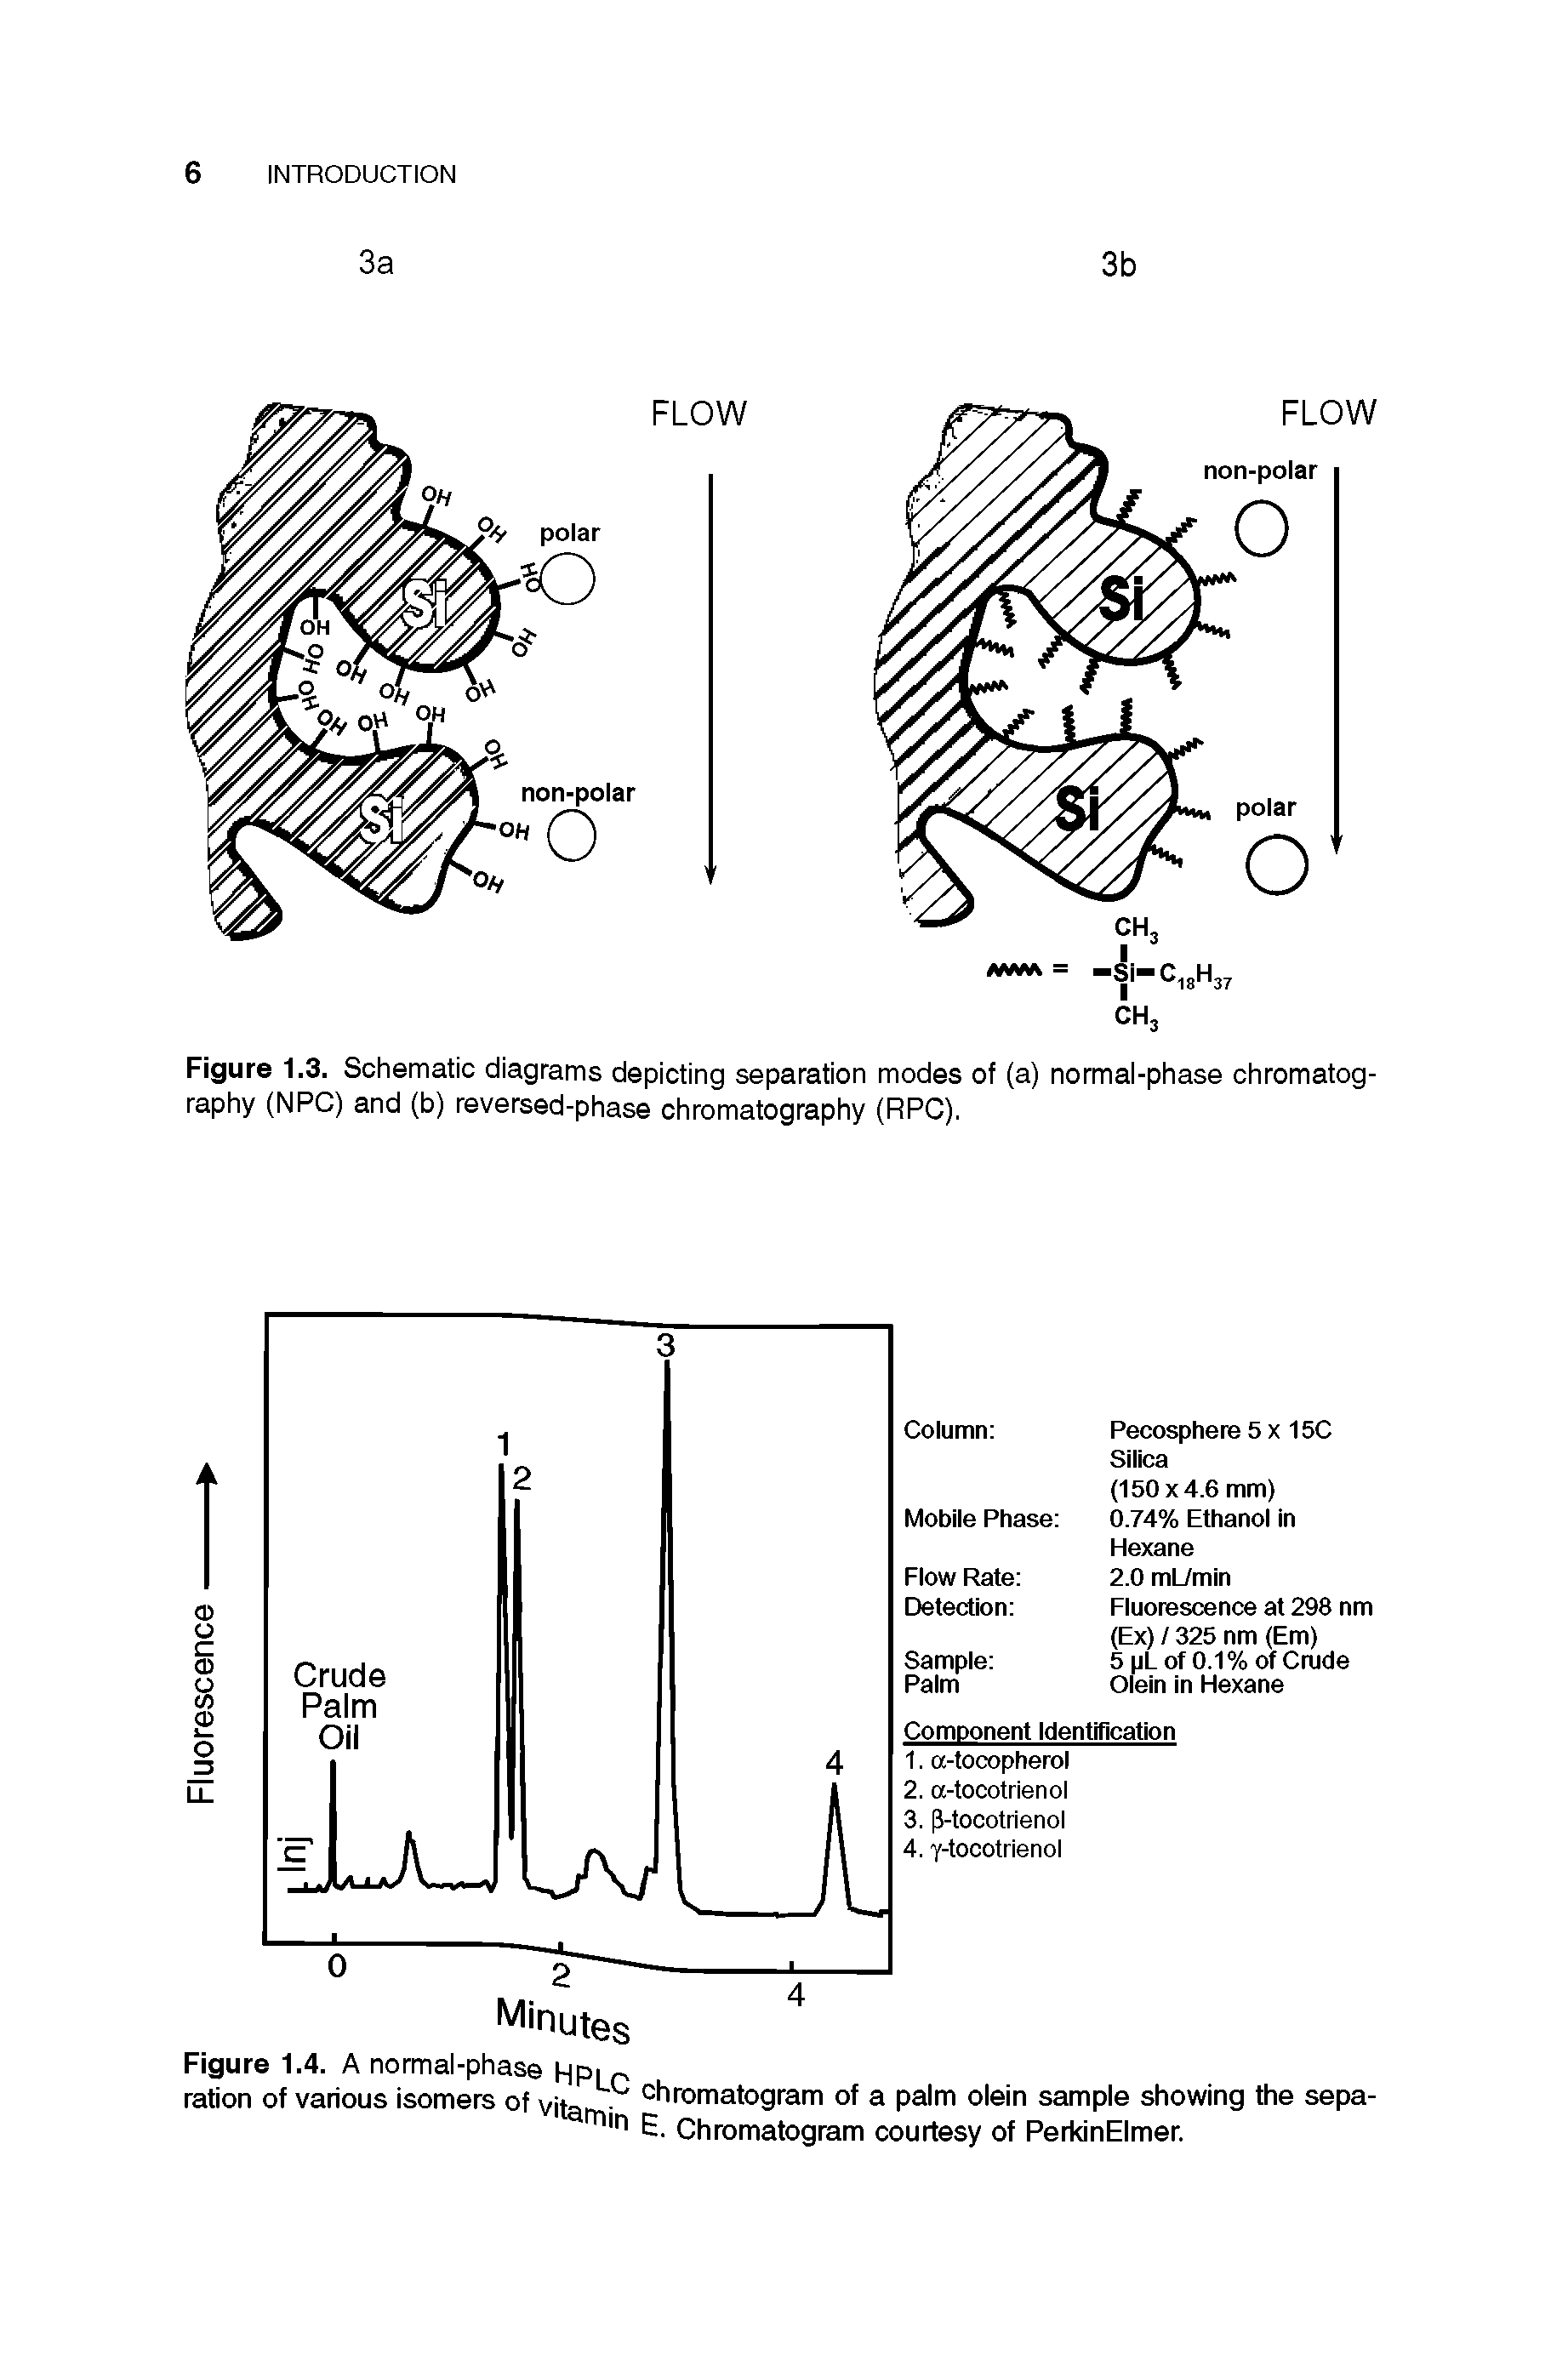 Figure 1.3. Schematic diagrams depicting separation modes of (a) normal-phase chromatography (NPC) and (b) reversed-phase chromatography (RPC).